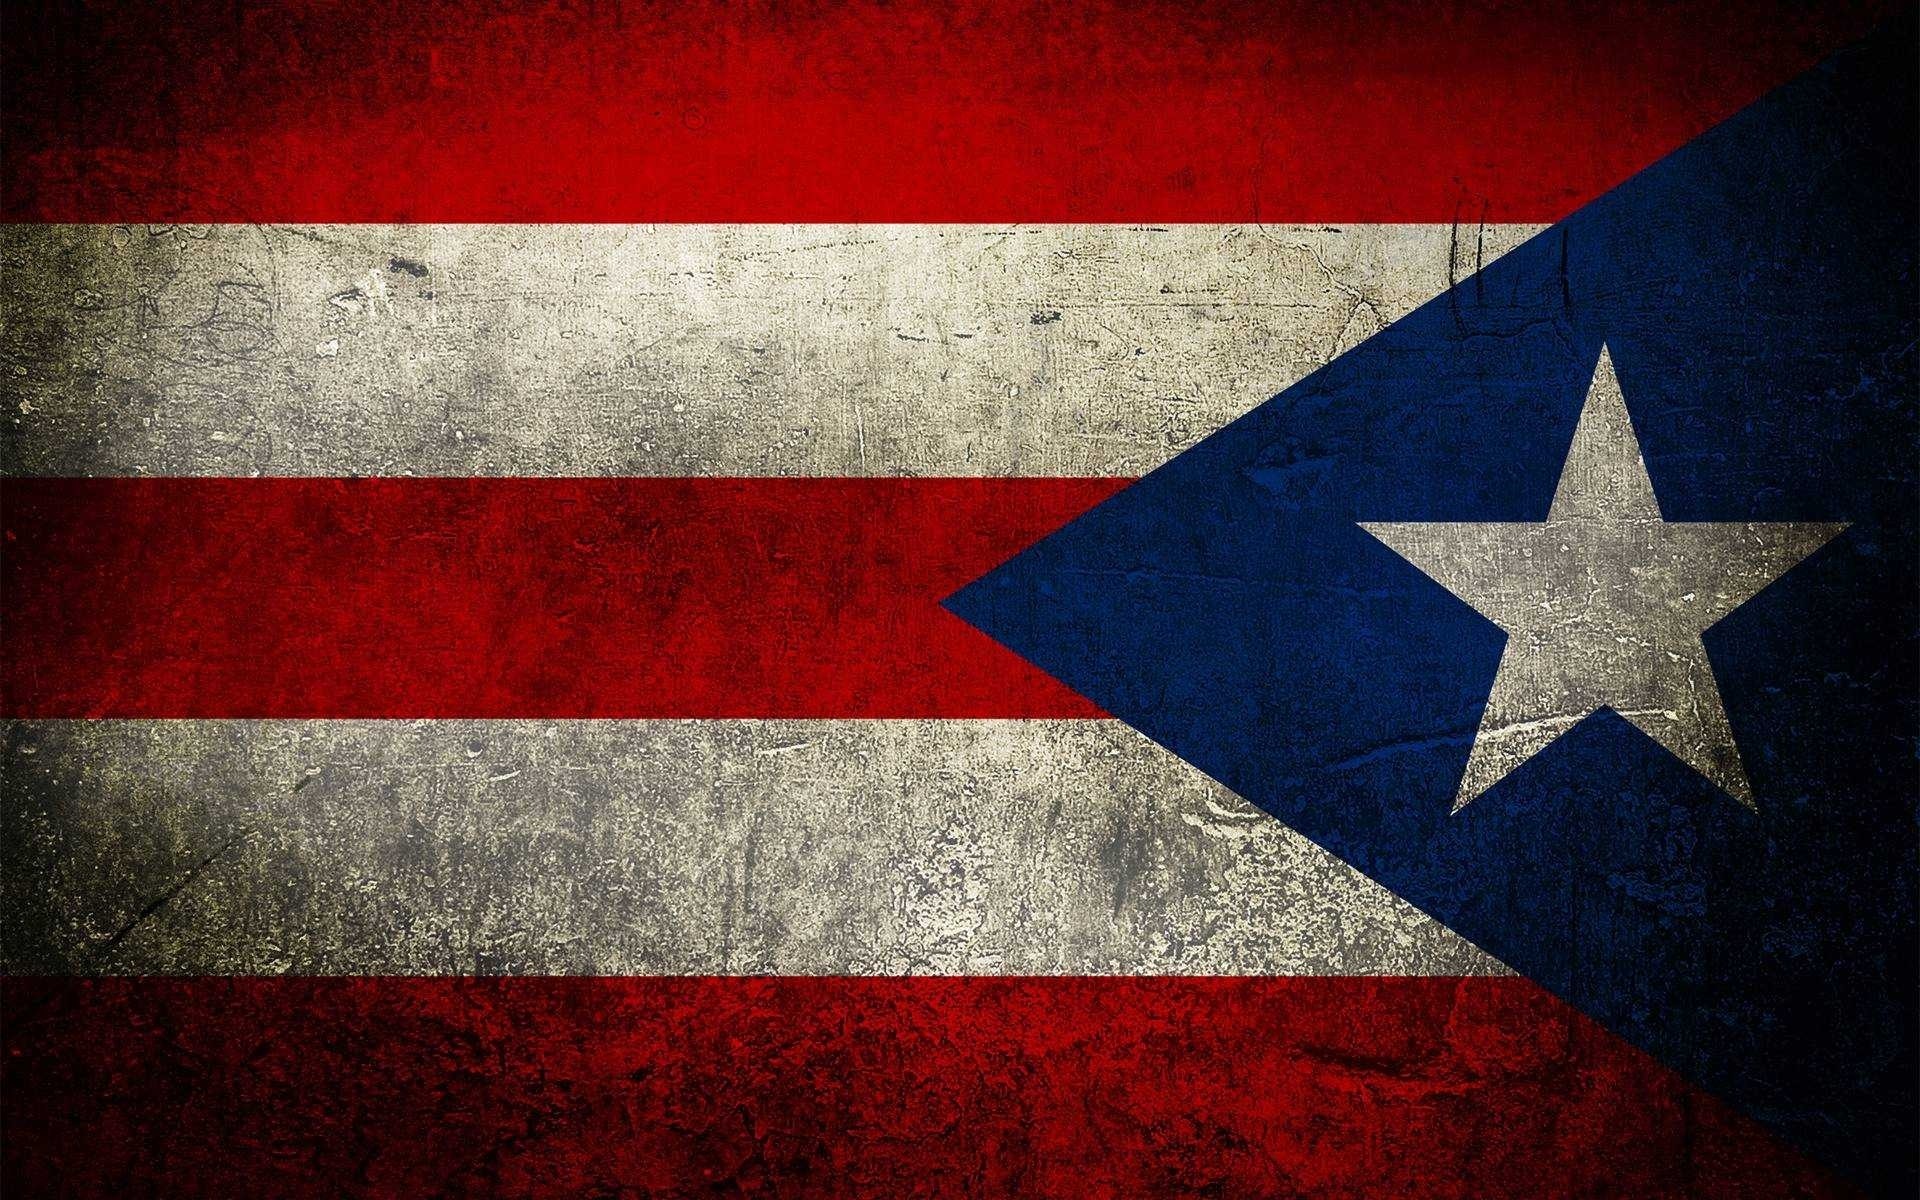 1920x1200 Title : puerto rico flag wallpaper gallery and wallpapers picture.  Dimension : 1920 x 1200. File Type : JPG/JPEG